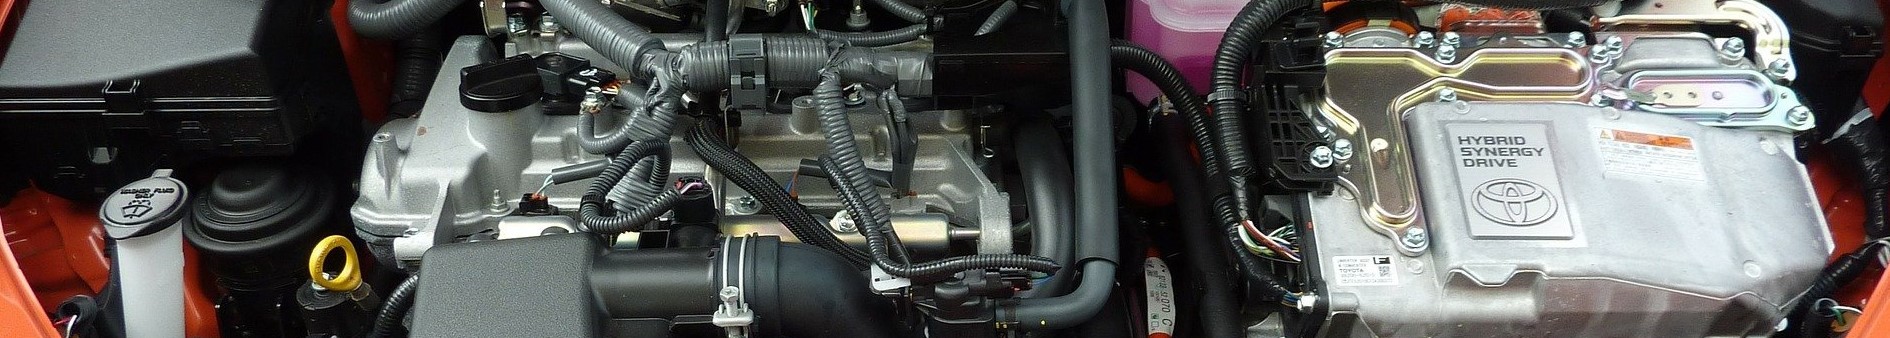 Image showing the engine area of an hybrid vehicle